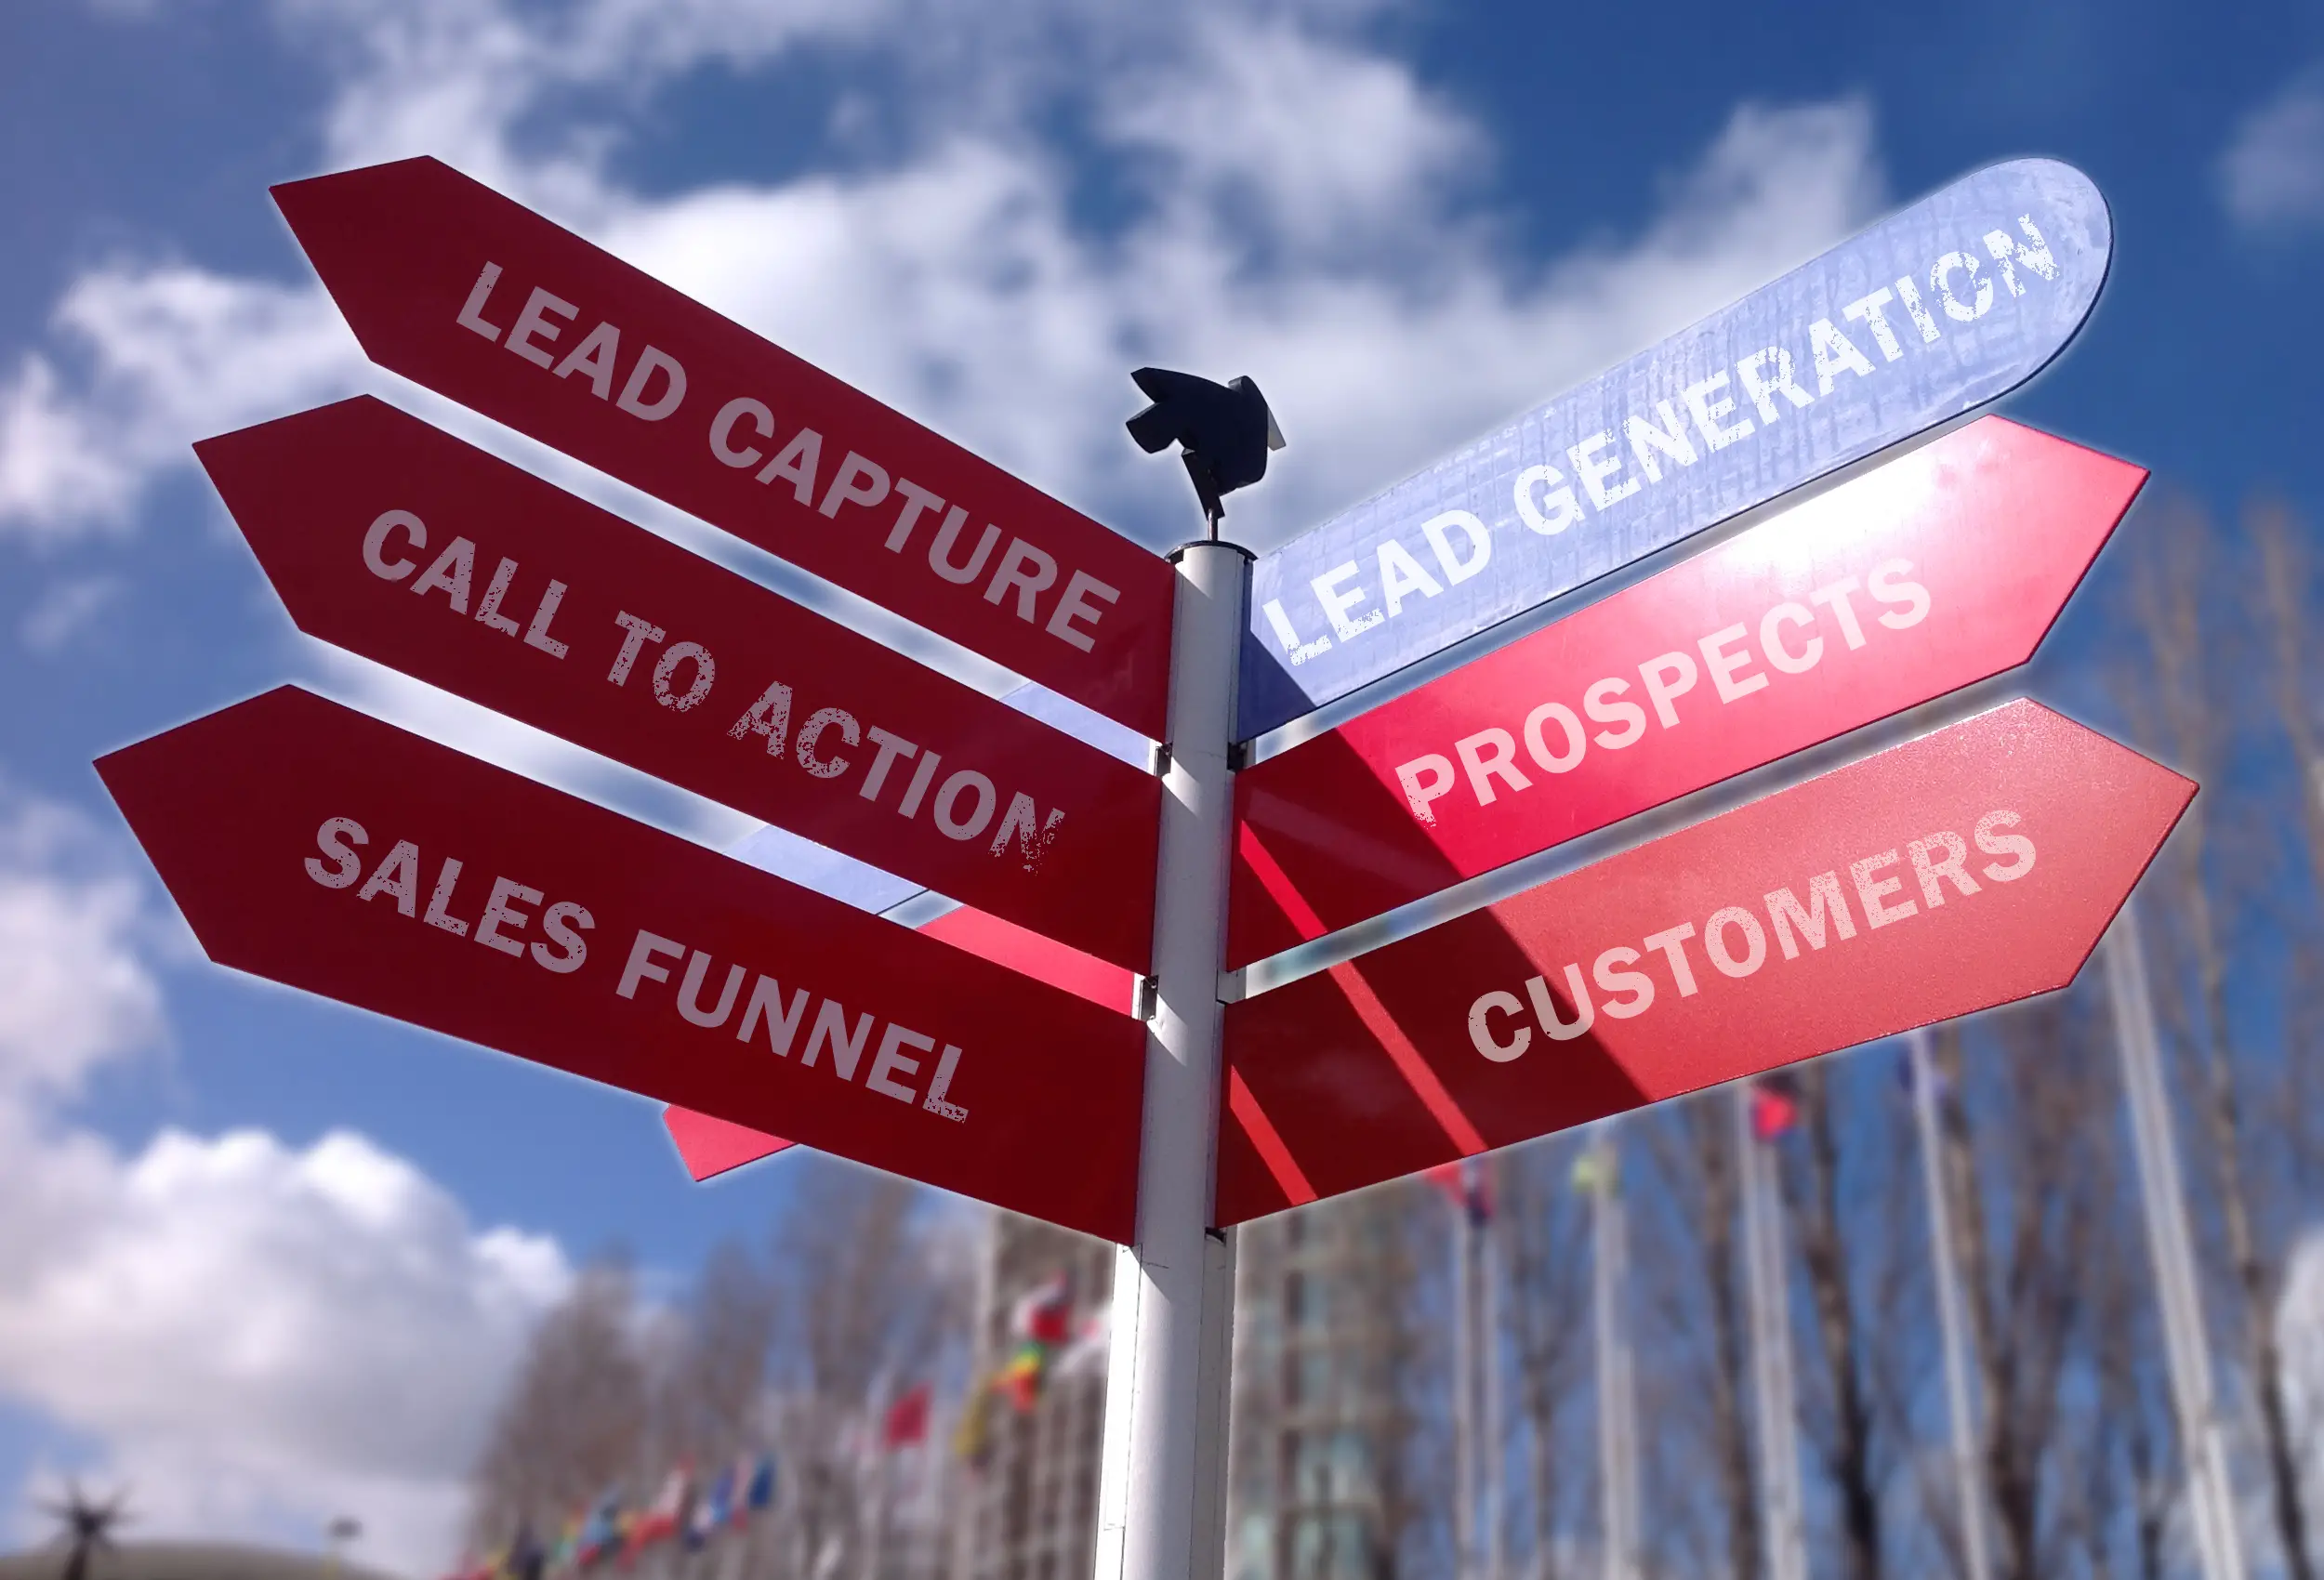 A sign post discussing lead generation, sales funnels, prospects, and customers.